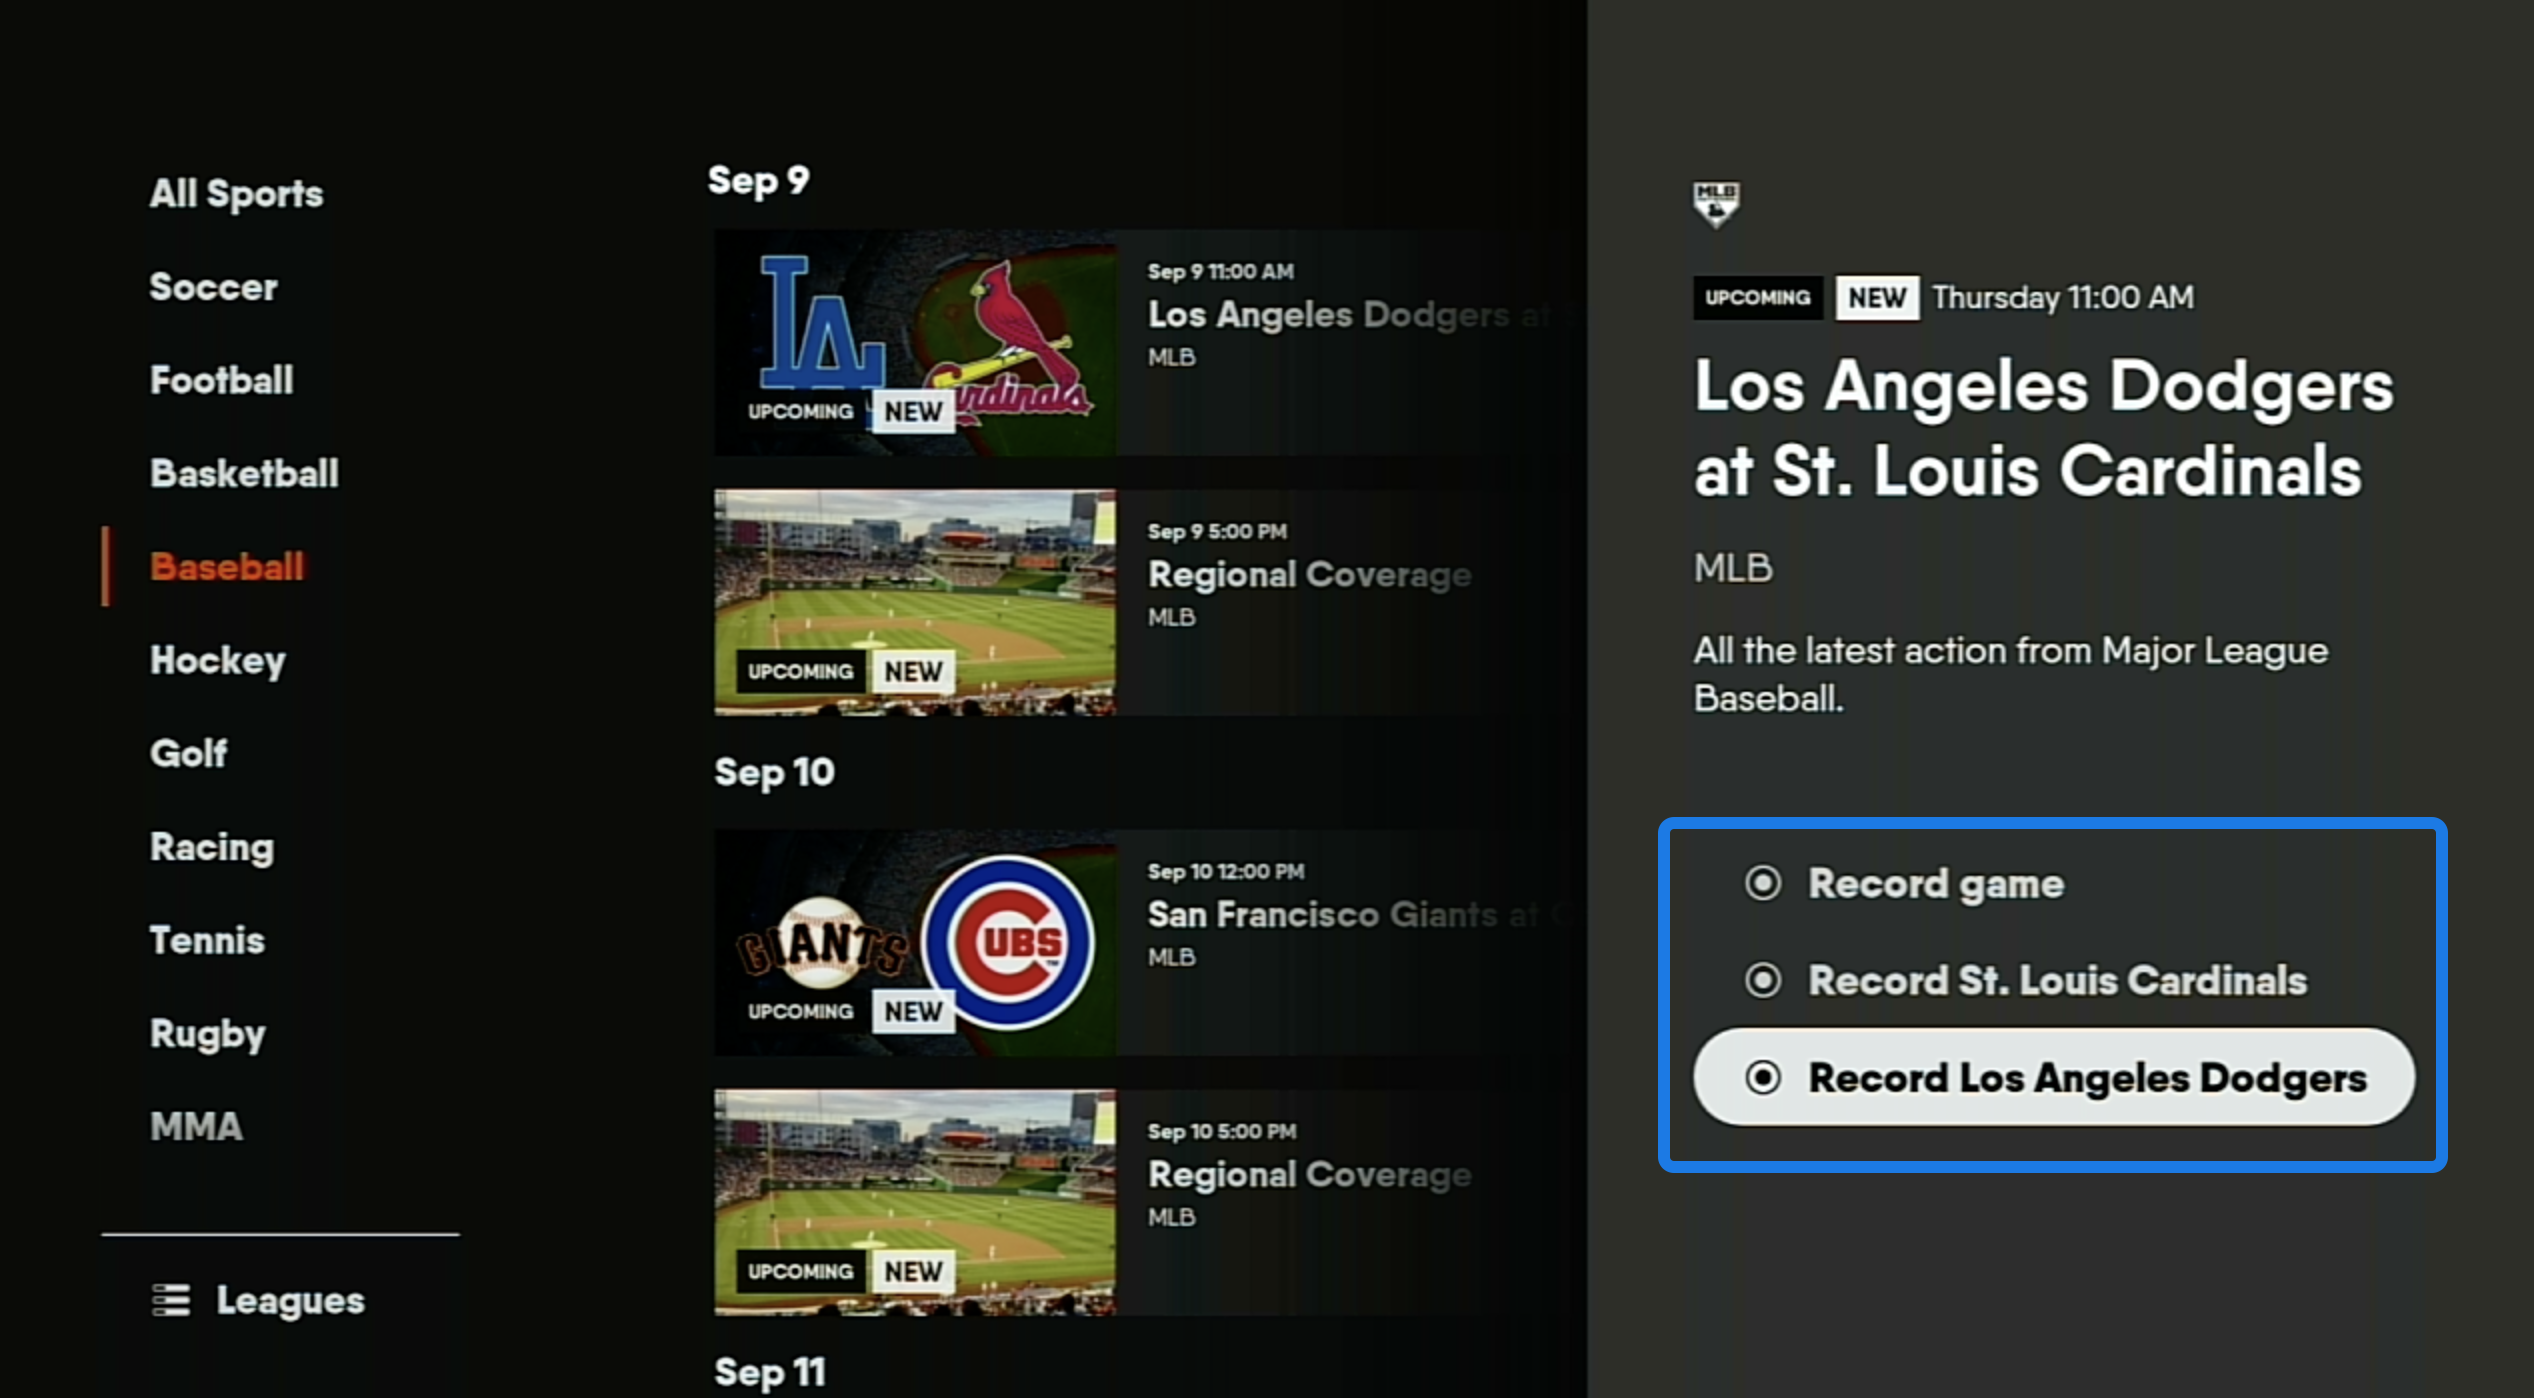 Program information on the SPORTS screen for an upcoming baseball game on the FuboTV app for Roku with RECORDING OPTIONS selected and RECORD LOS ANGELES DODGERS highlighted